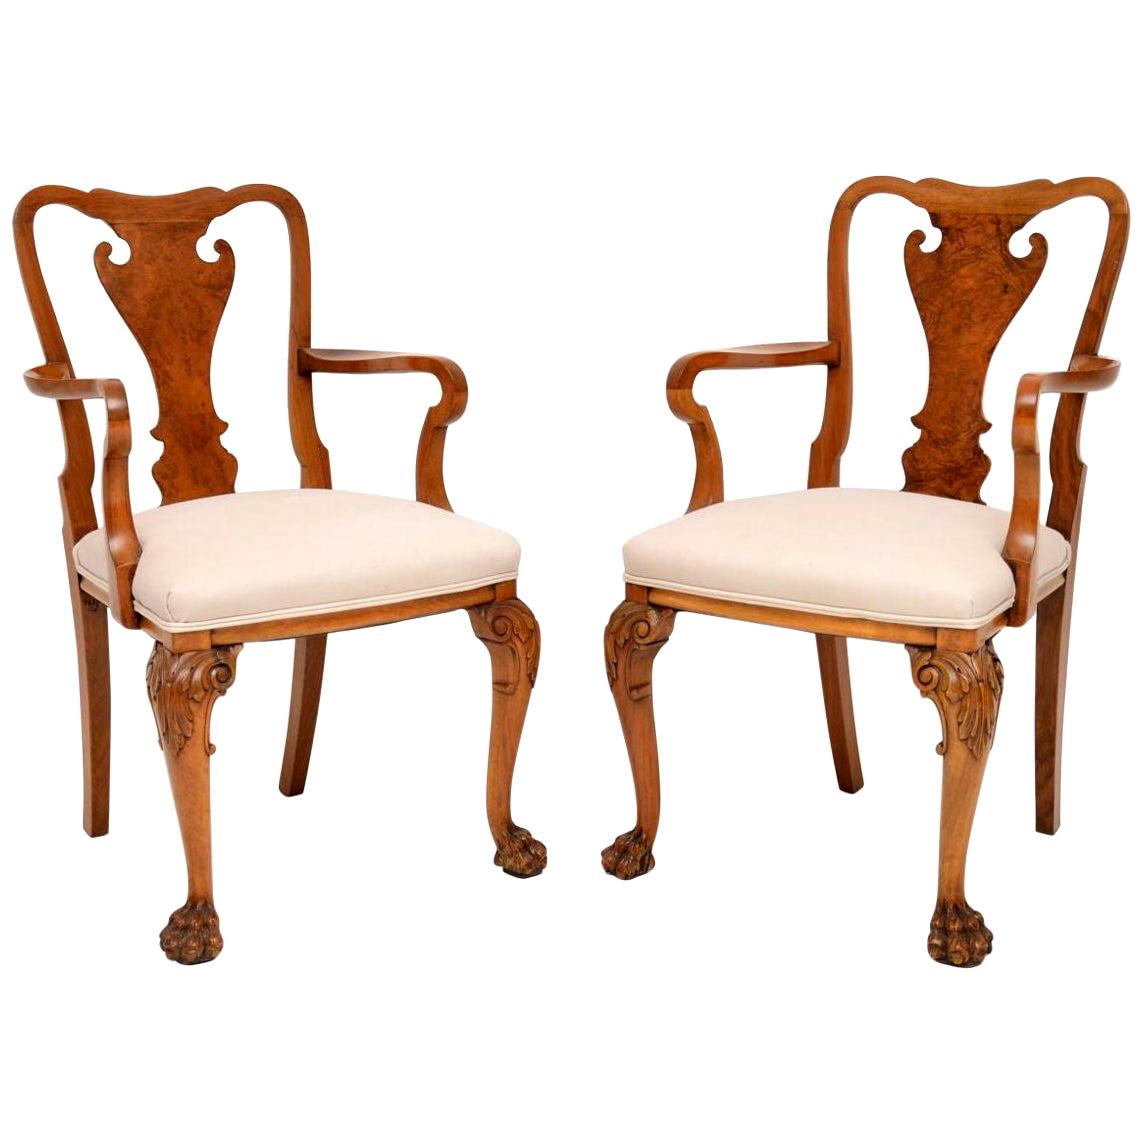 Pair of Antique Walnut Queen Anne Style Carver Armchairs